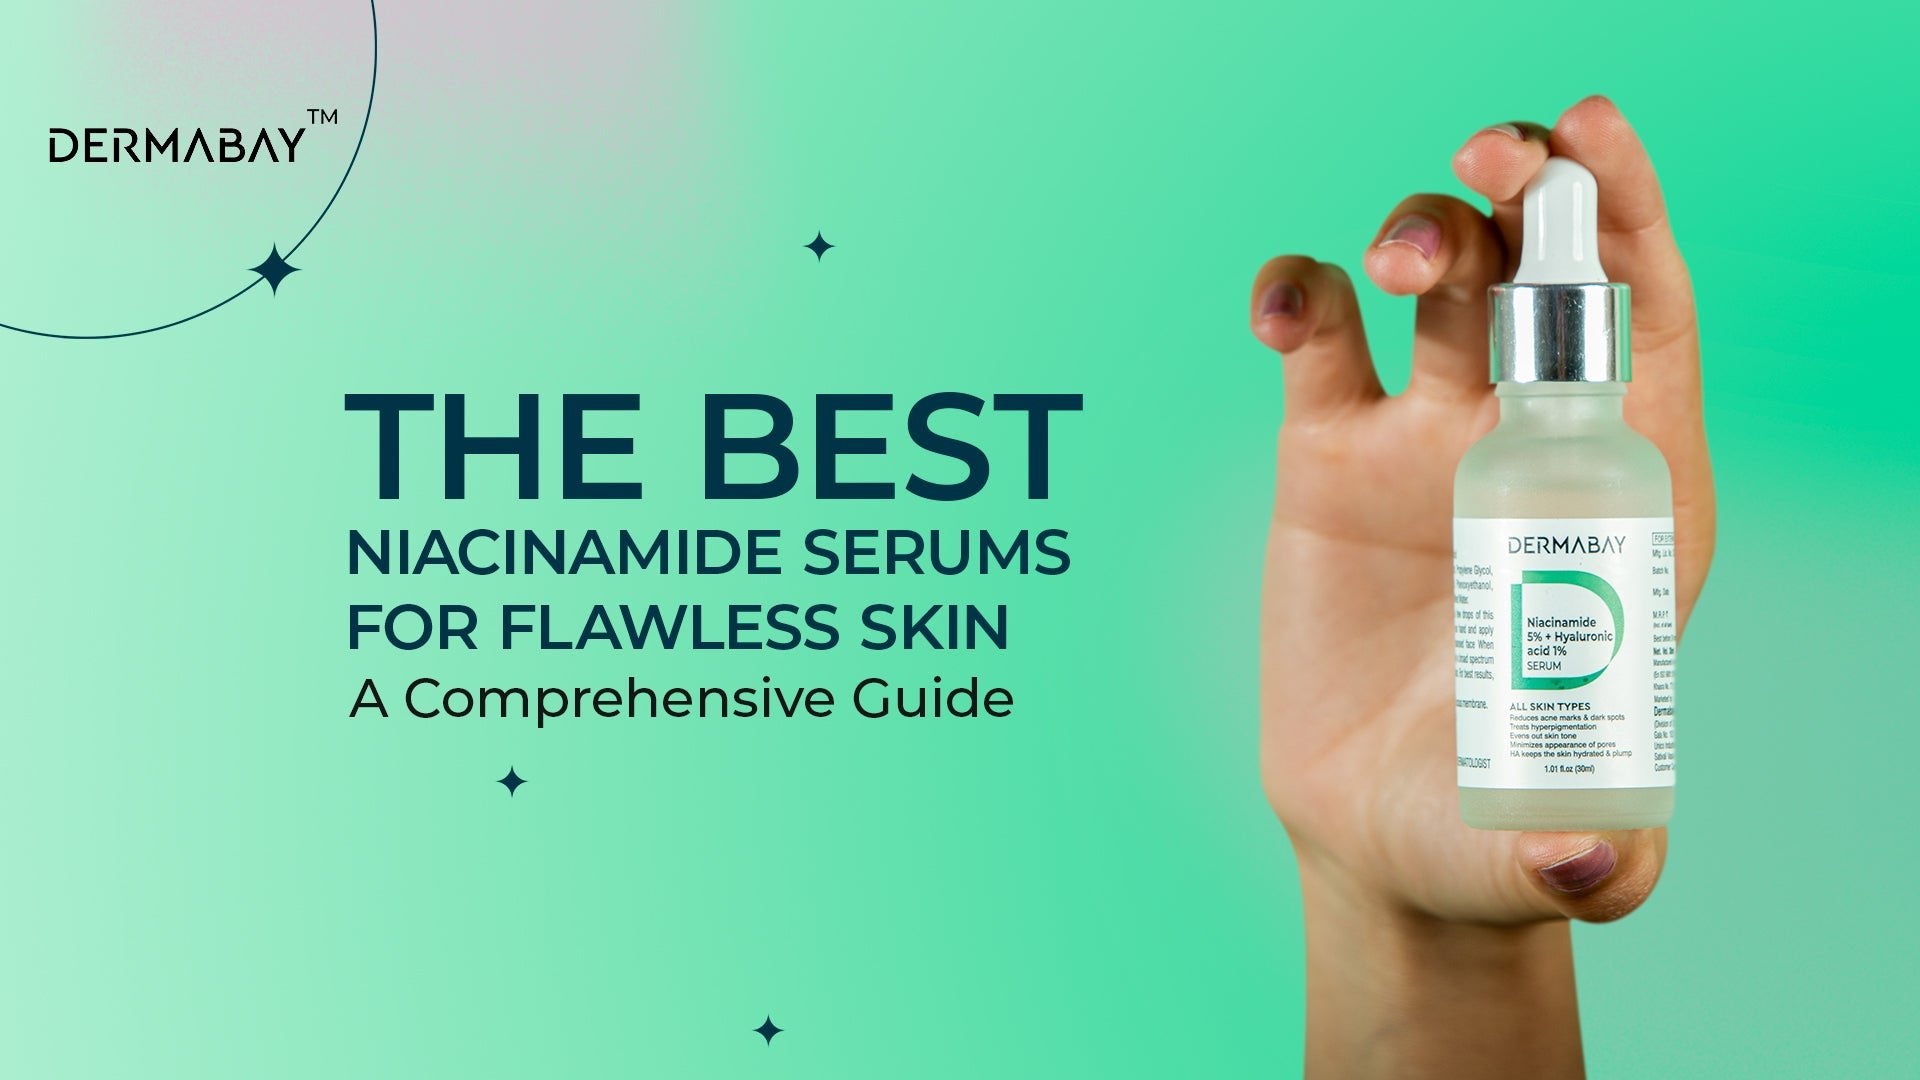 The Best Niacinamide Serums for Flawless Skin: A Comprehensive Guide - Dermabay